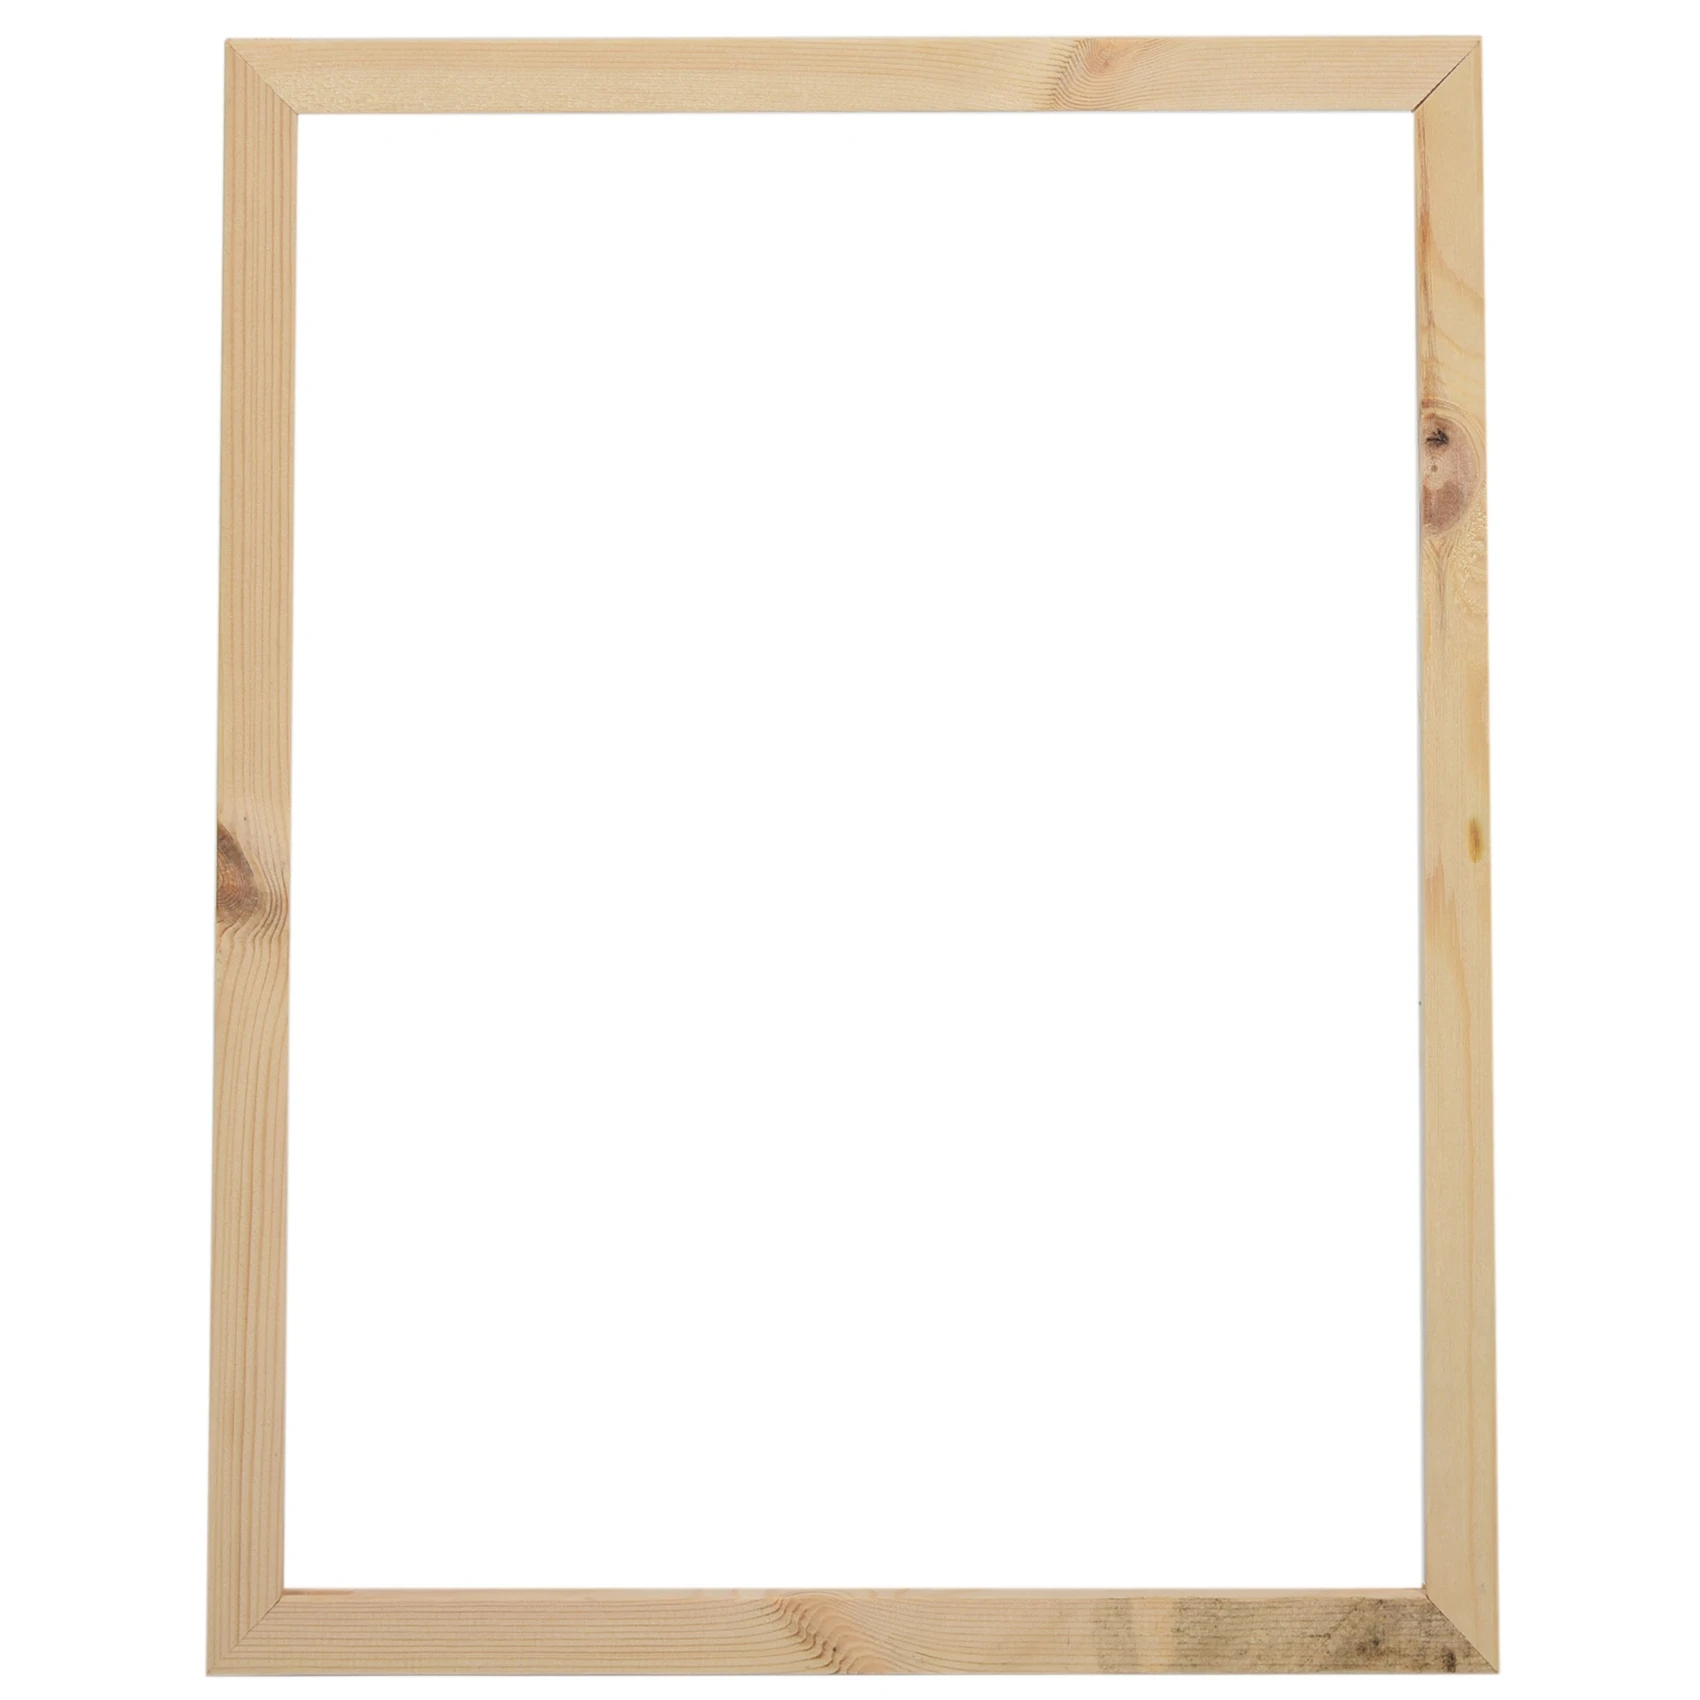 

40X50 cm Wooden Frame DIY Picture Frames Art Suitable for Home Decor Painting Digital Diamond Drawing Paintings